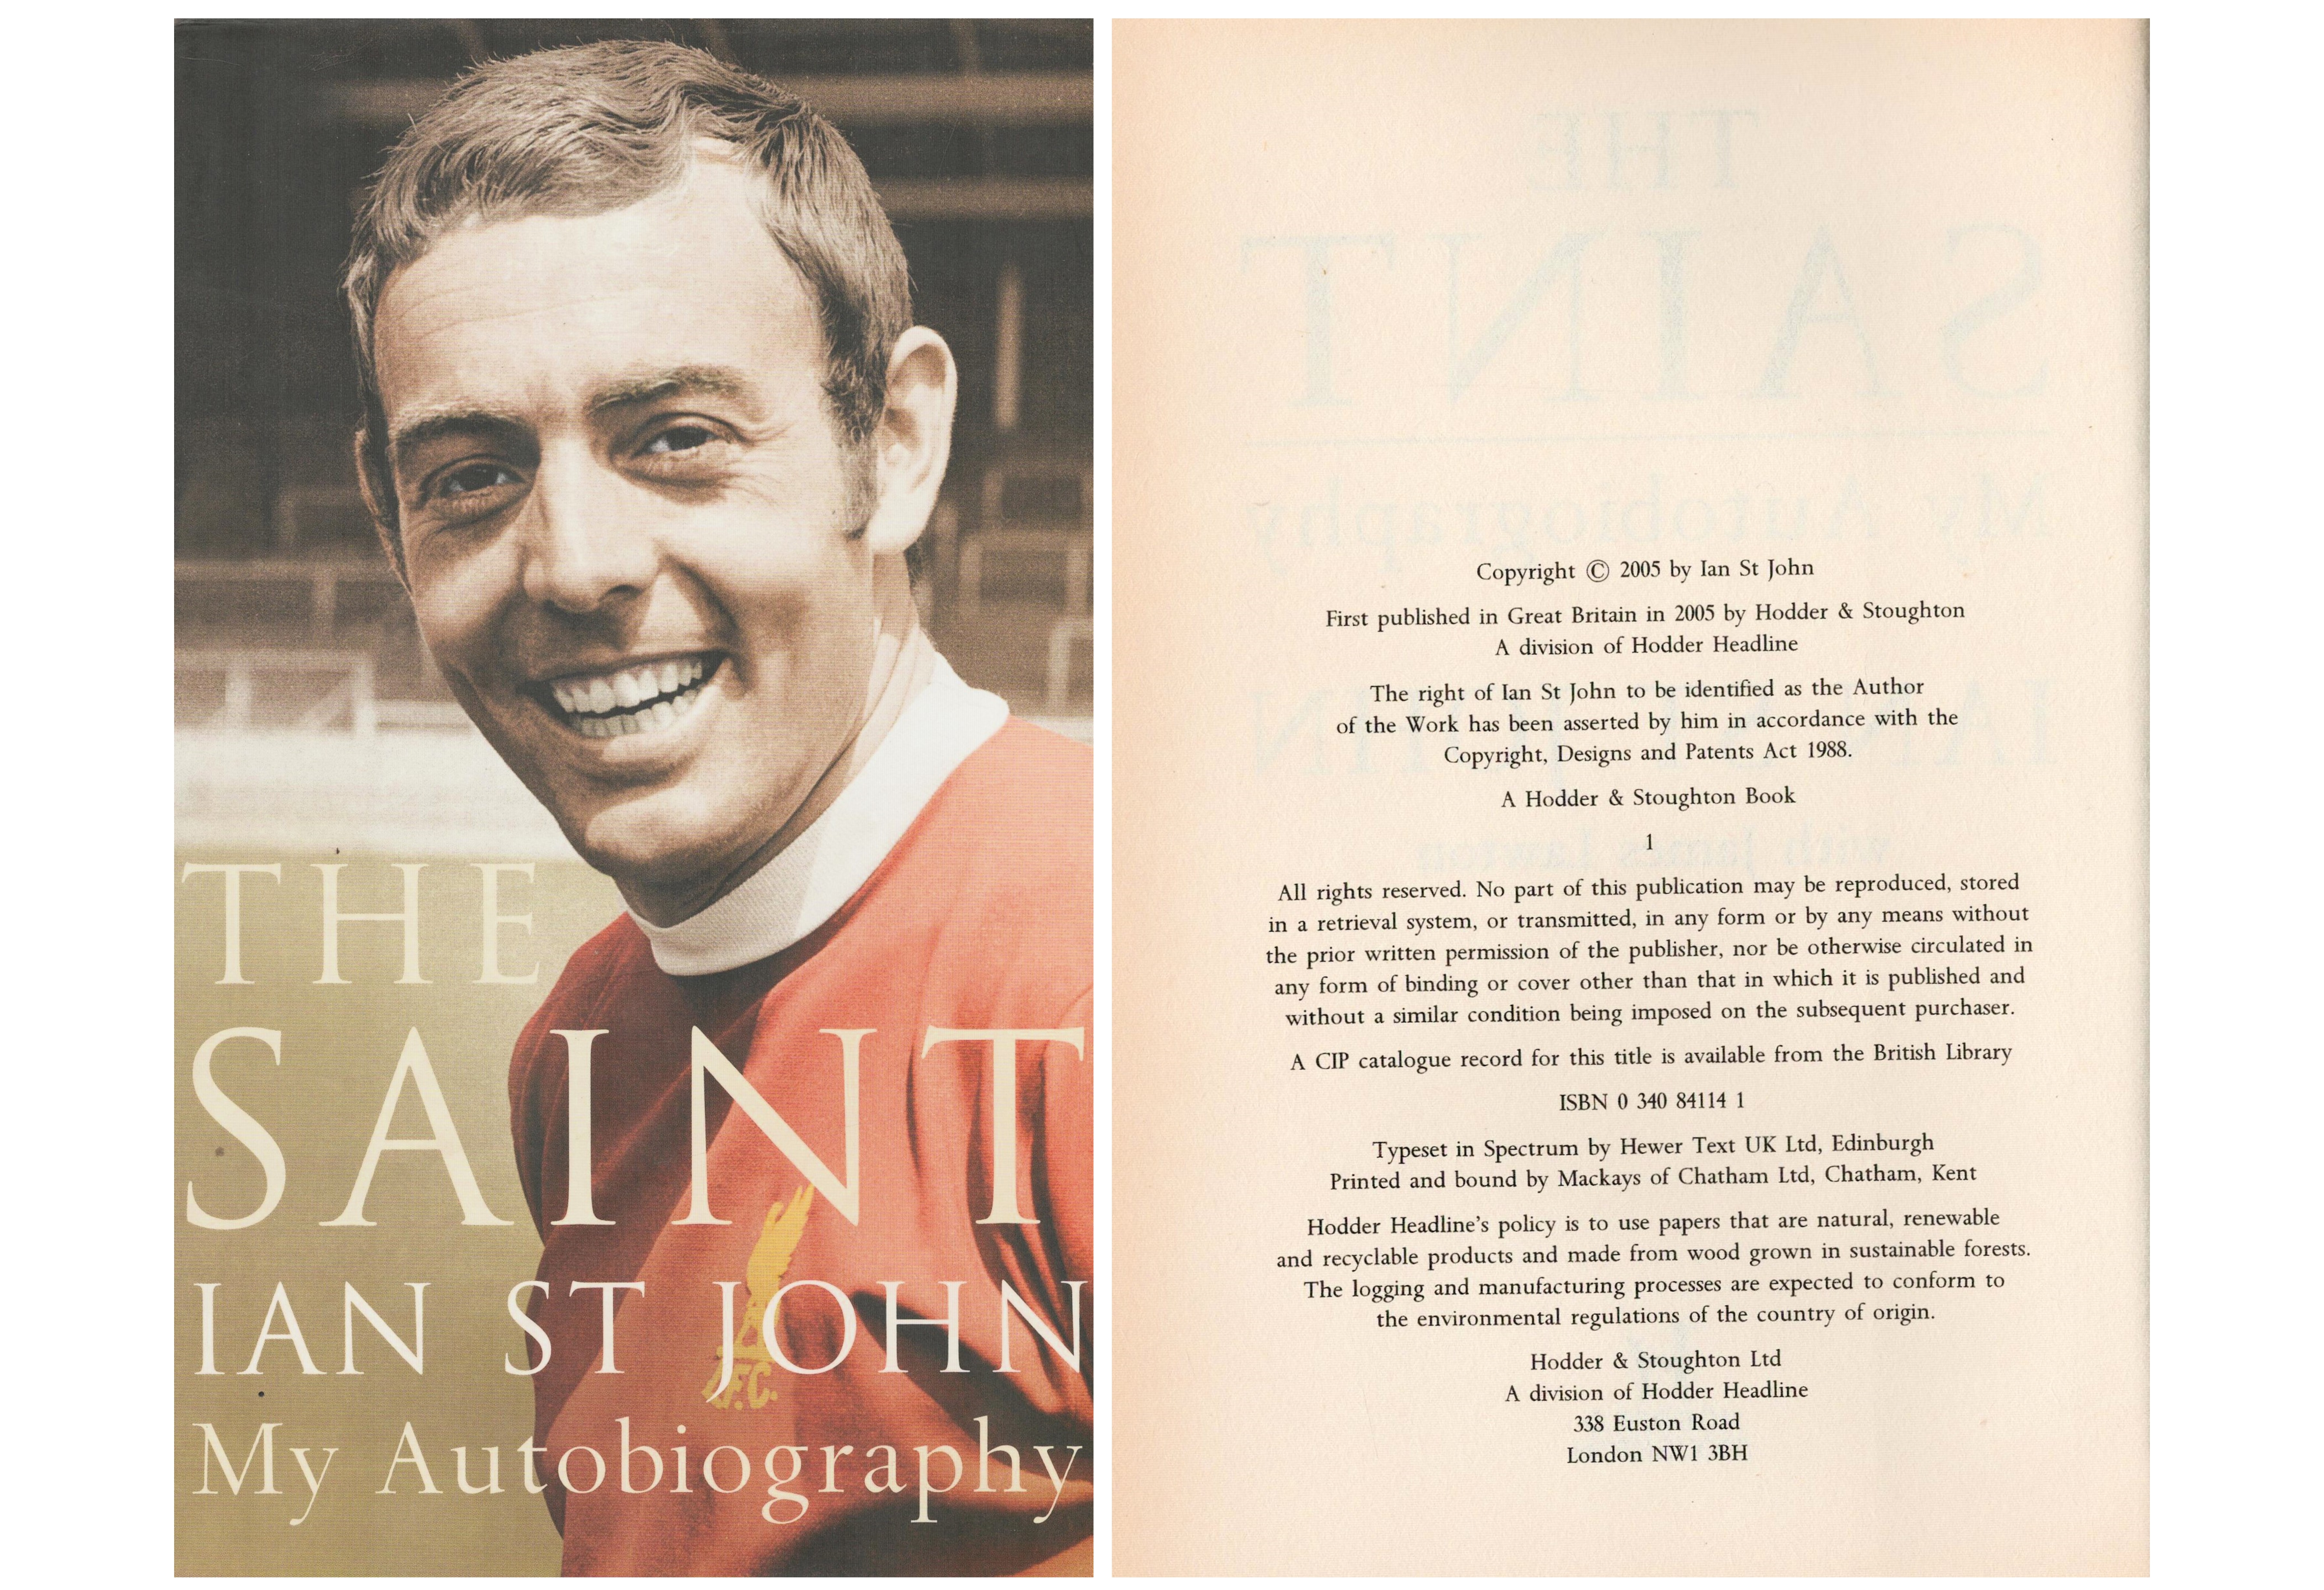 The Saint Ian St John My Autobiography first edition 2005 hardback book. Unsigned. Good Condition.